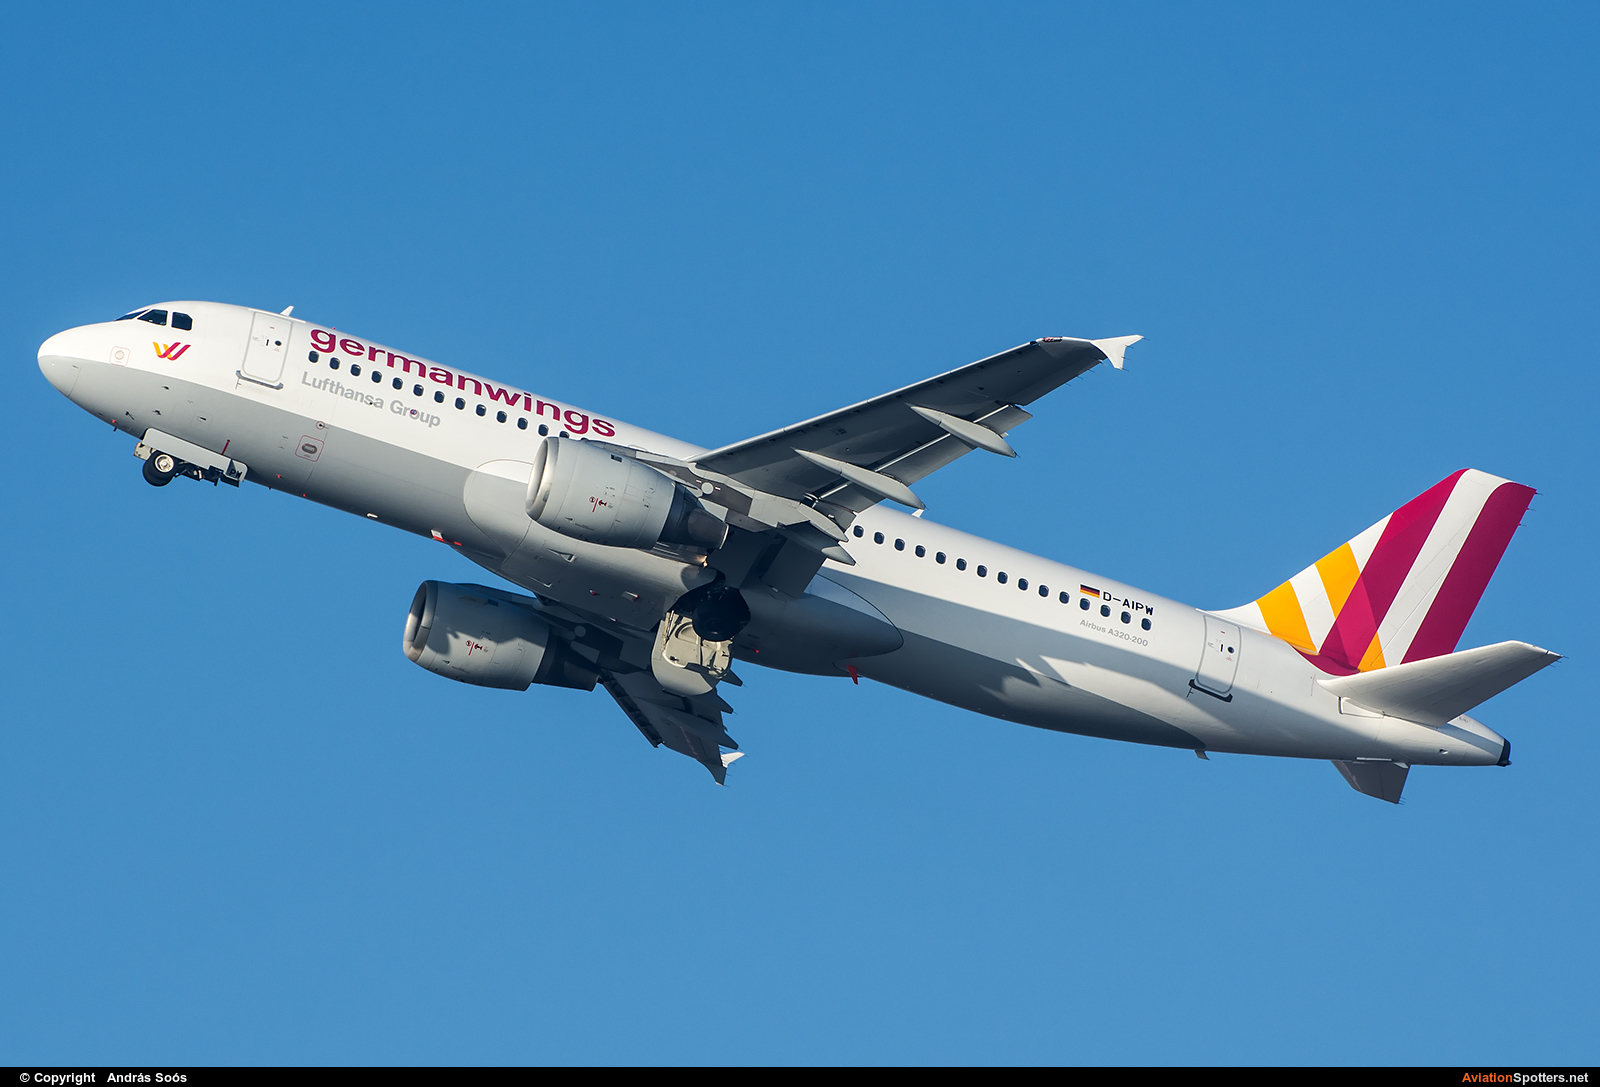 Germanwings  -  A320-211  (D-AIPW) By András Soós (sas1965)